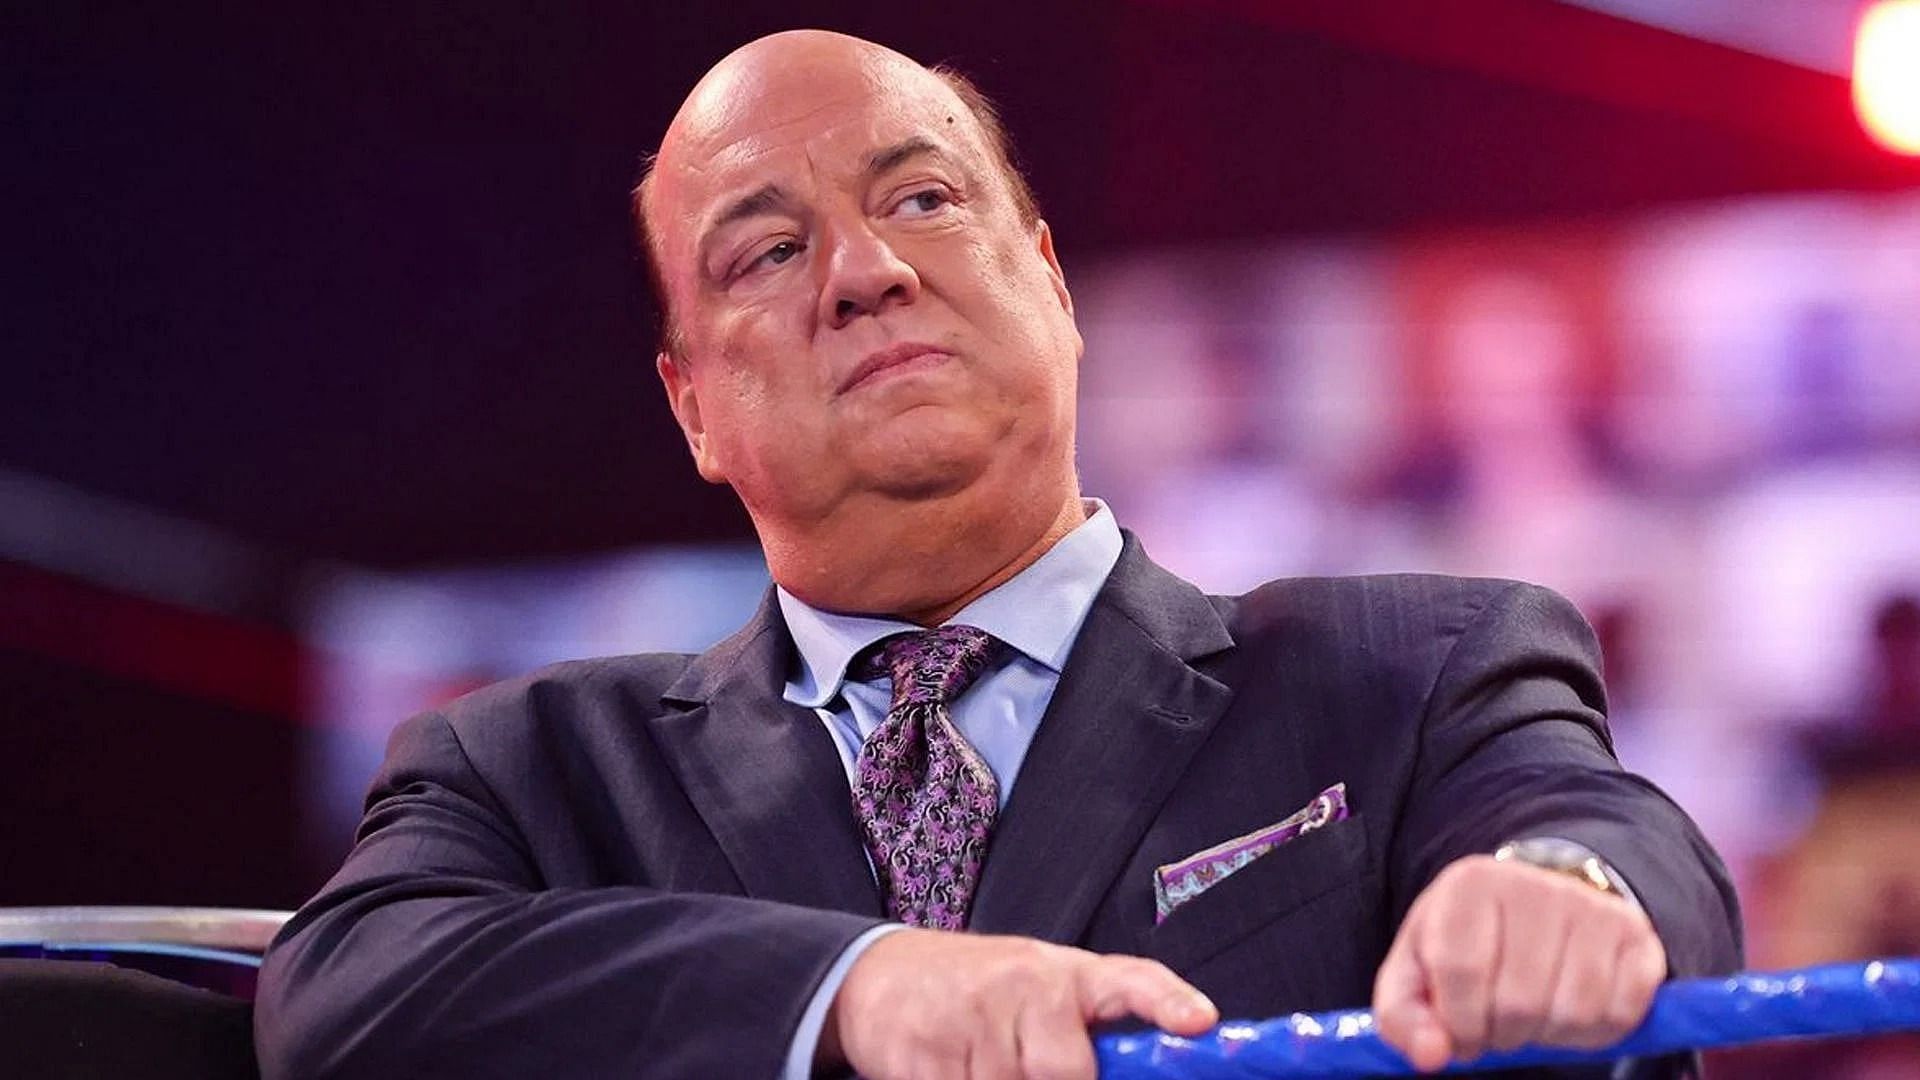 This WWE RAW star discussed his character with Paul Heyman